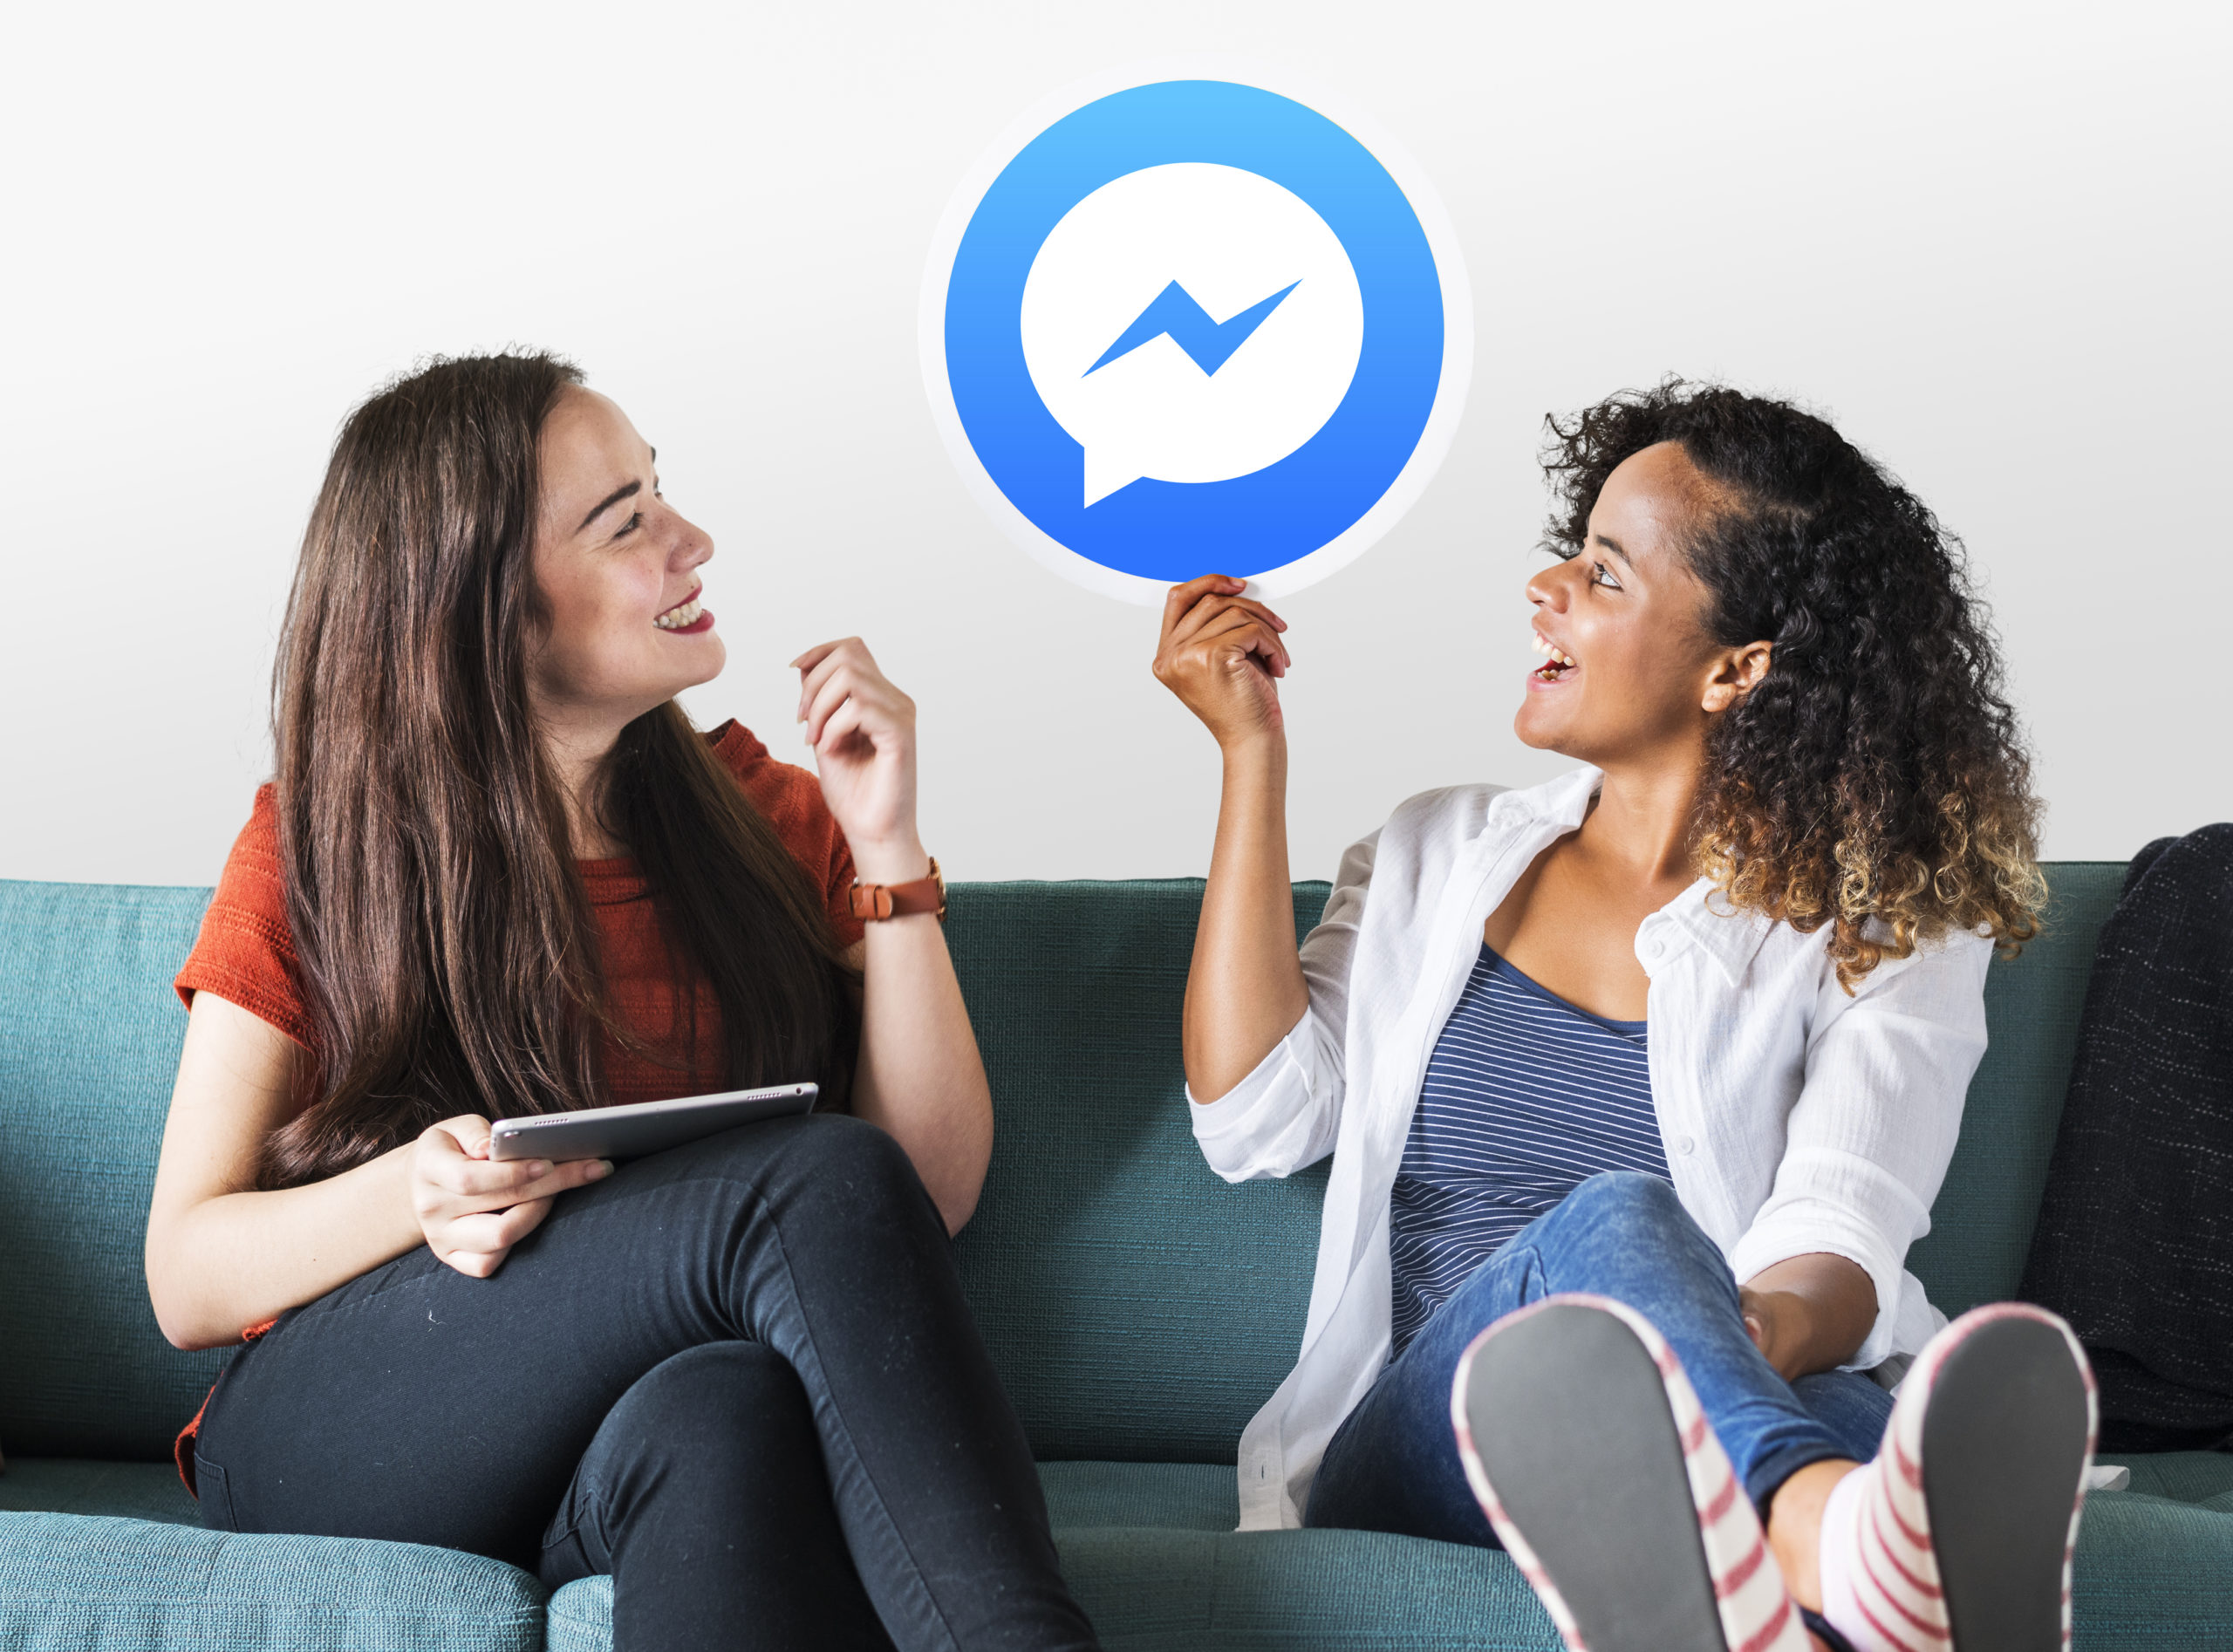 Young women showing a Facebook Messenger icon